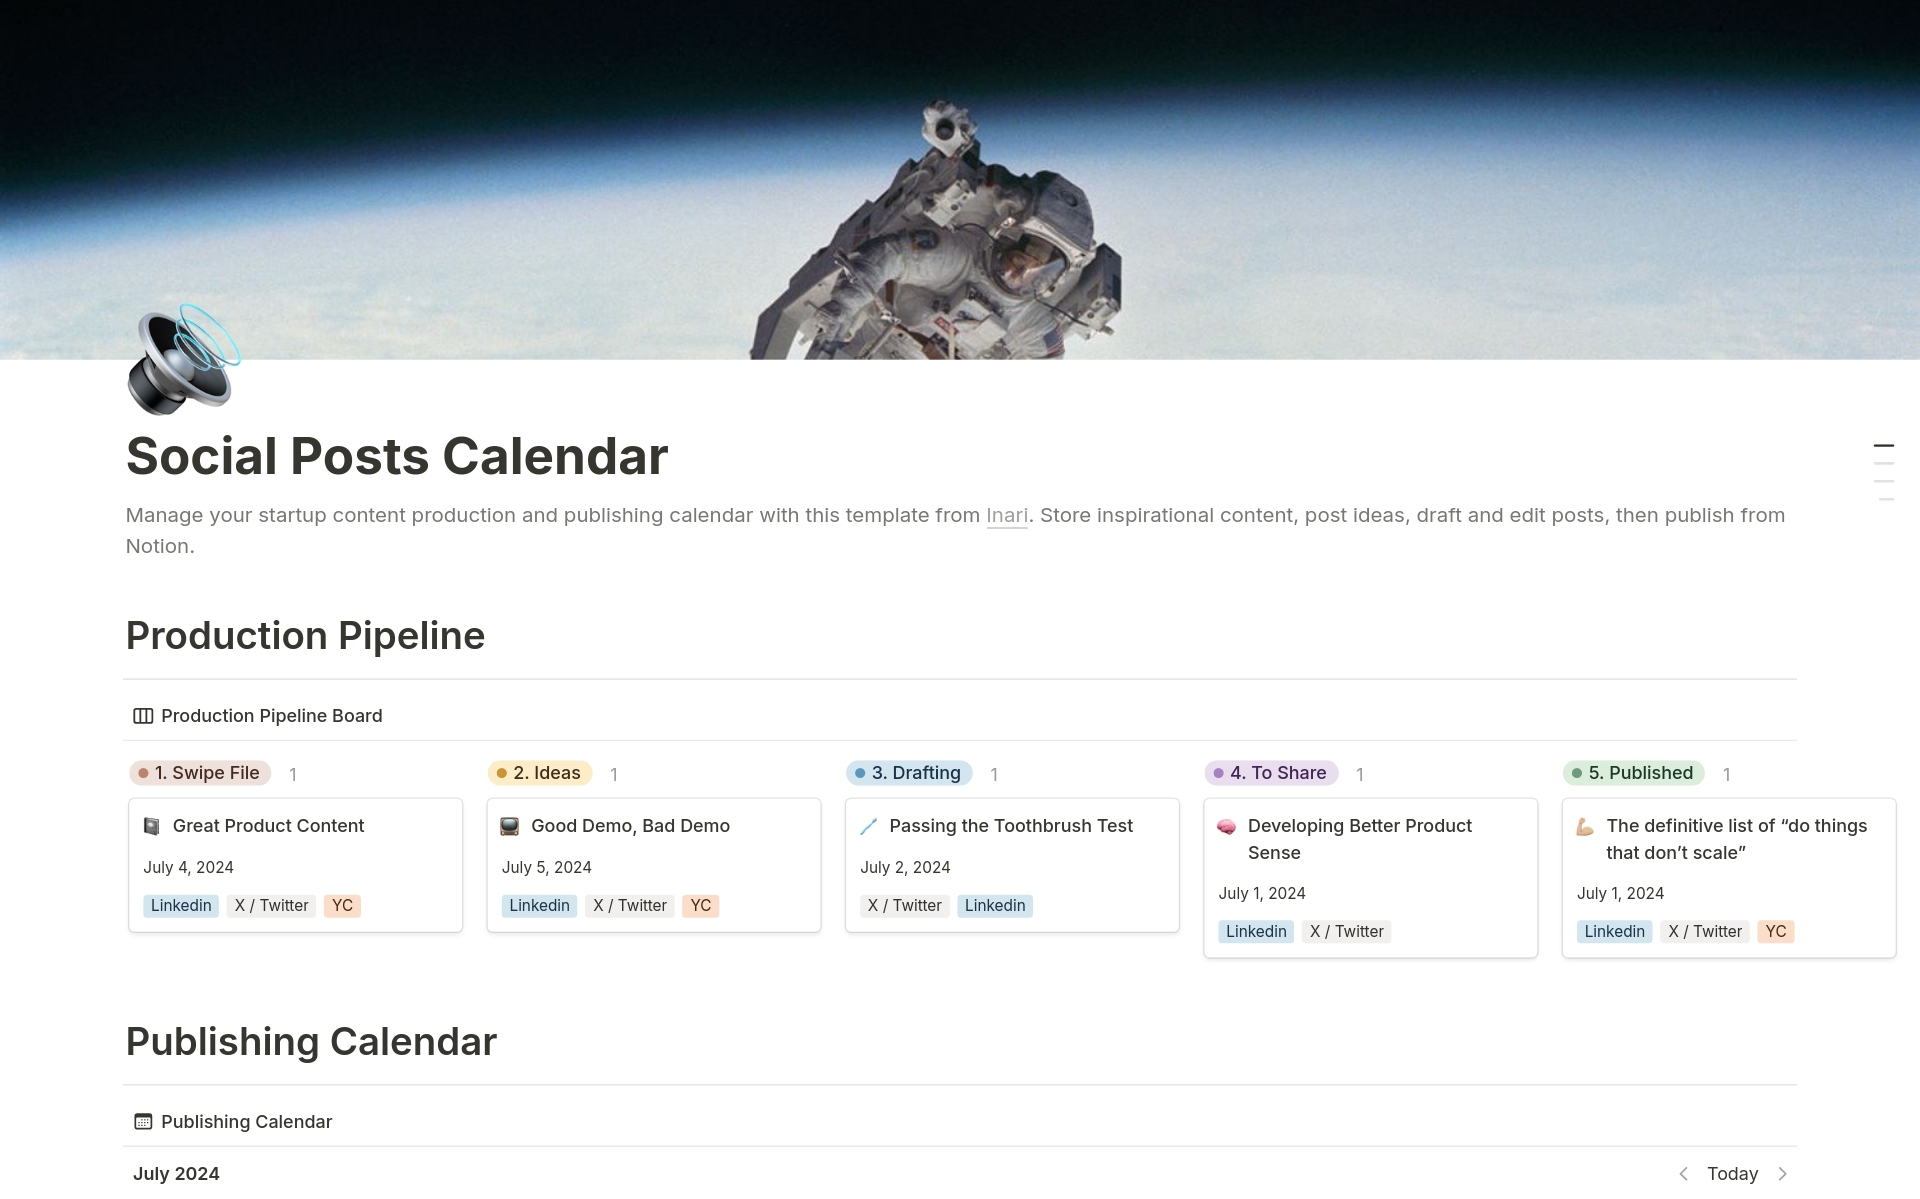 Manage your startup content product and publishing calendar with this template from Inari (S23). Store inspirational content, post ideas, draft and edit posts, then publish from Notion.